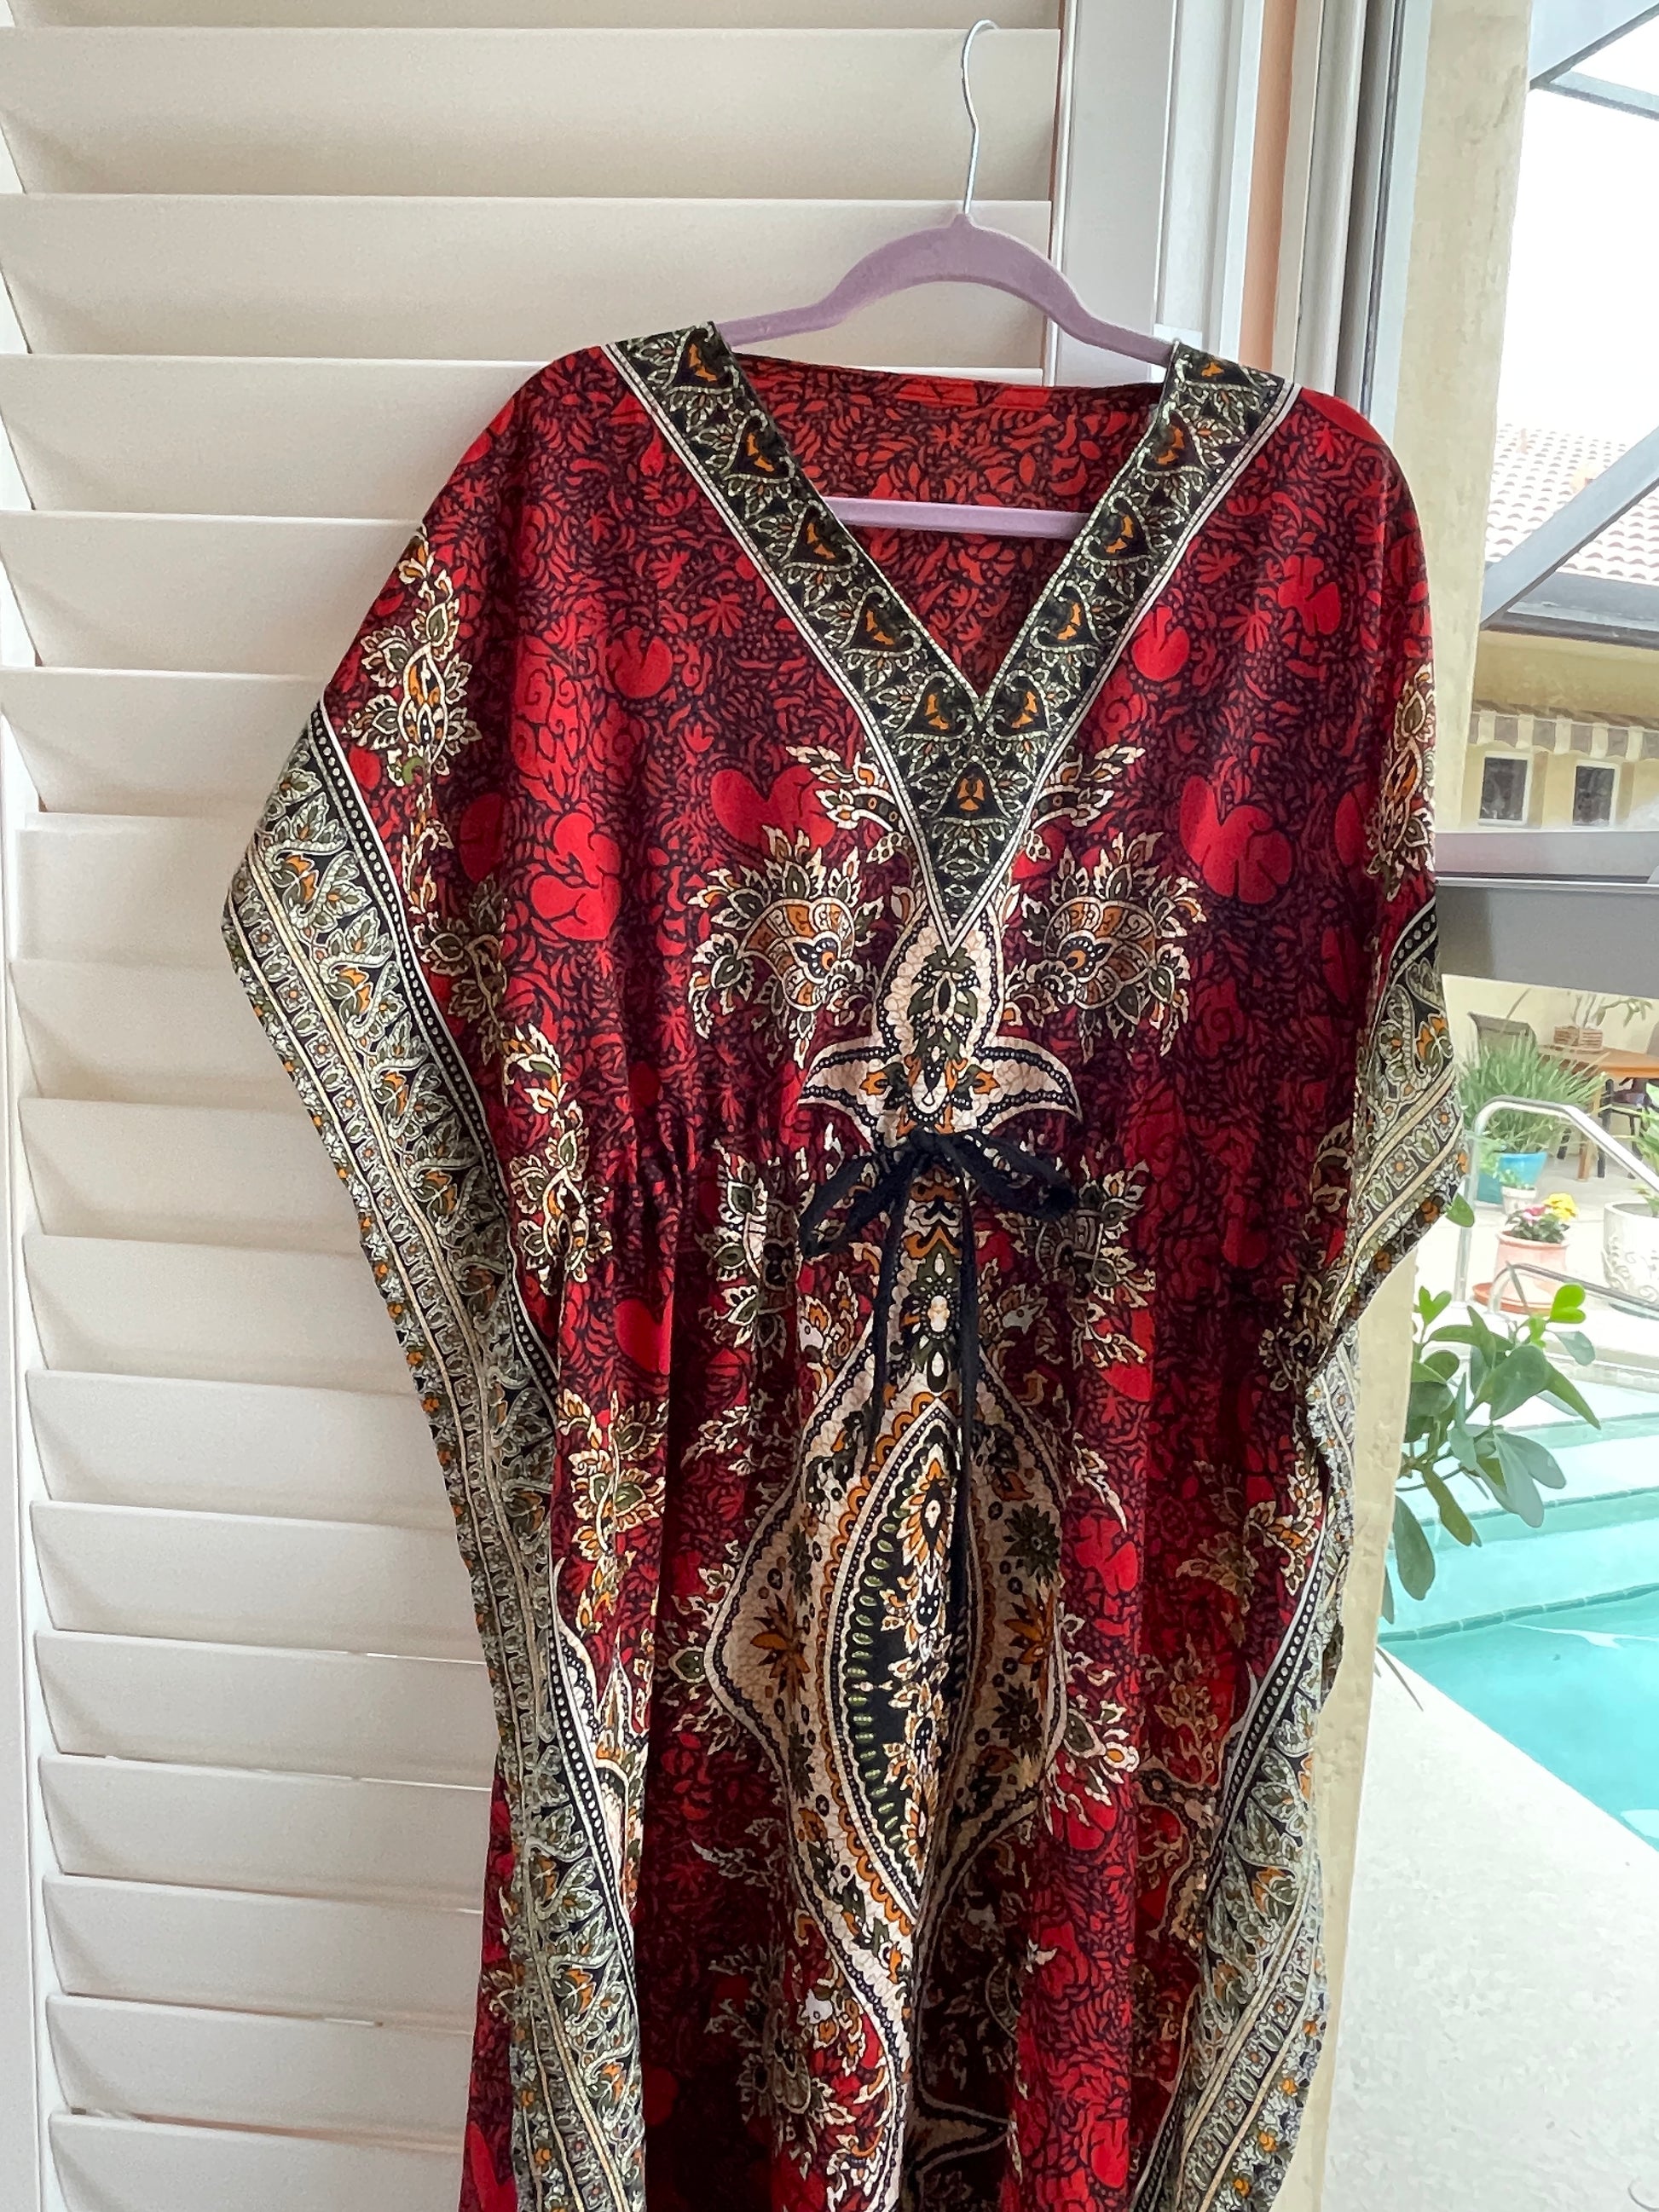  By the Pool 2000s Boho Casual Red Print Lounge Caftan free size